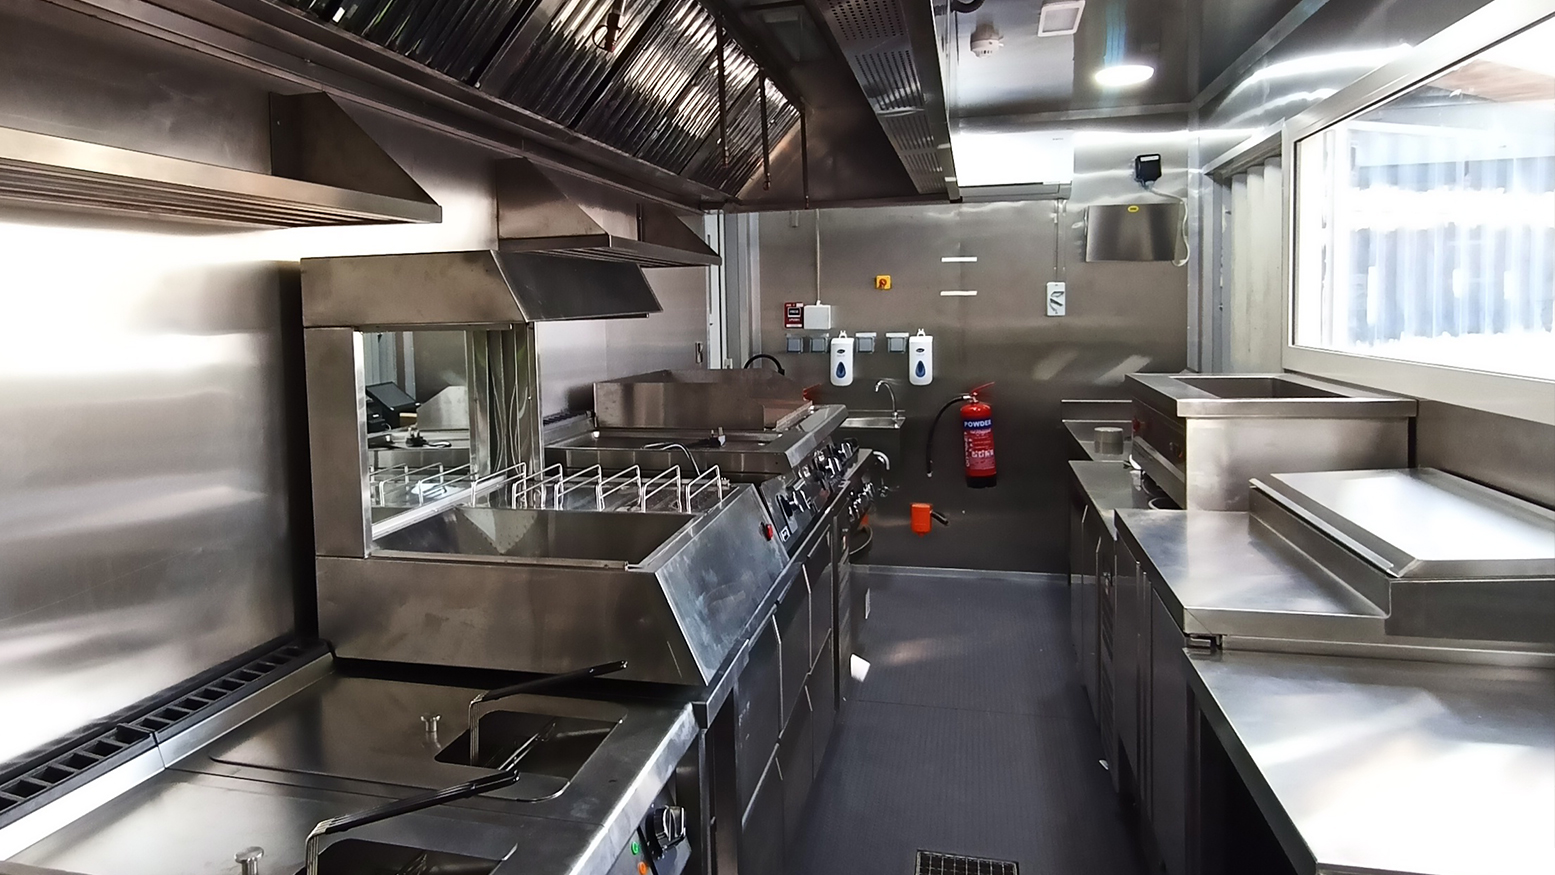 Shipping container kitchen